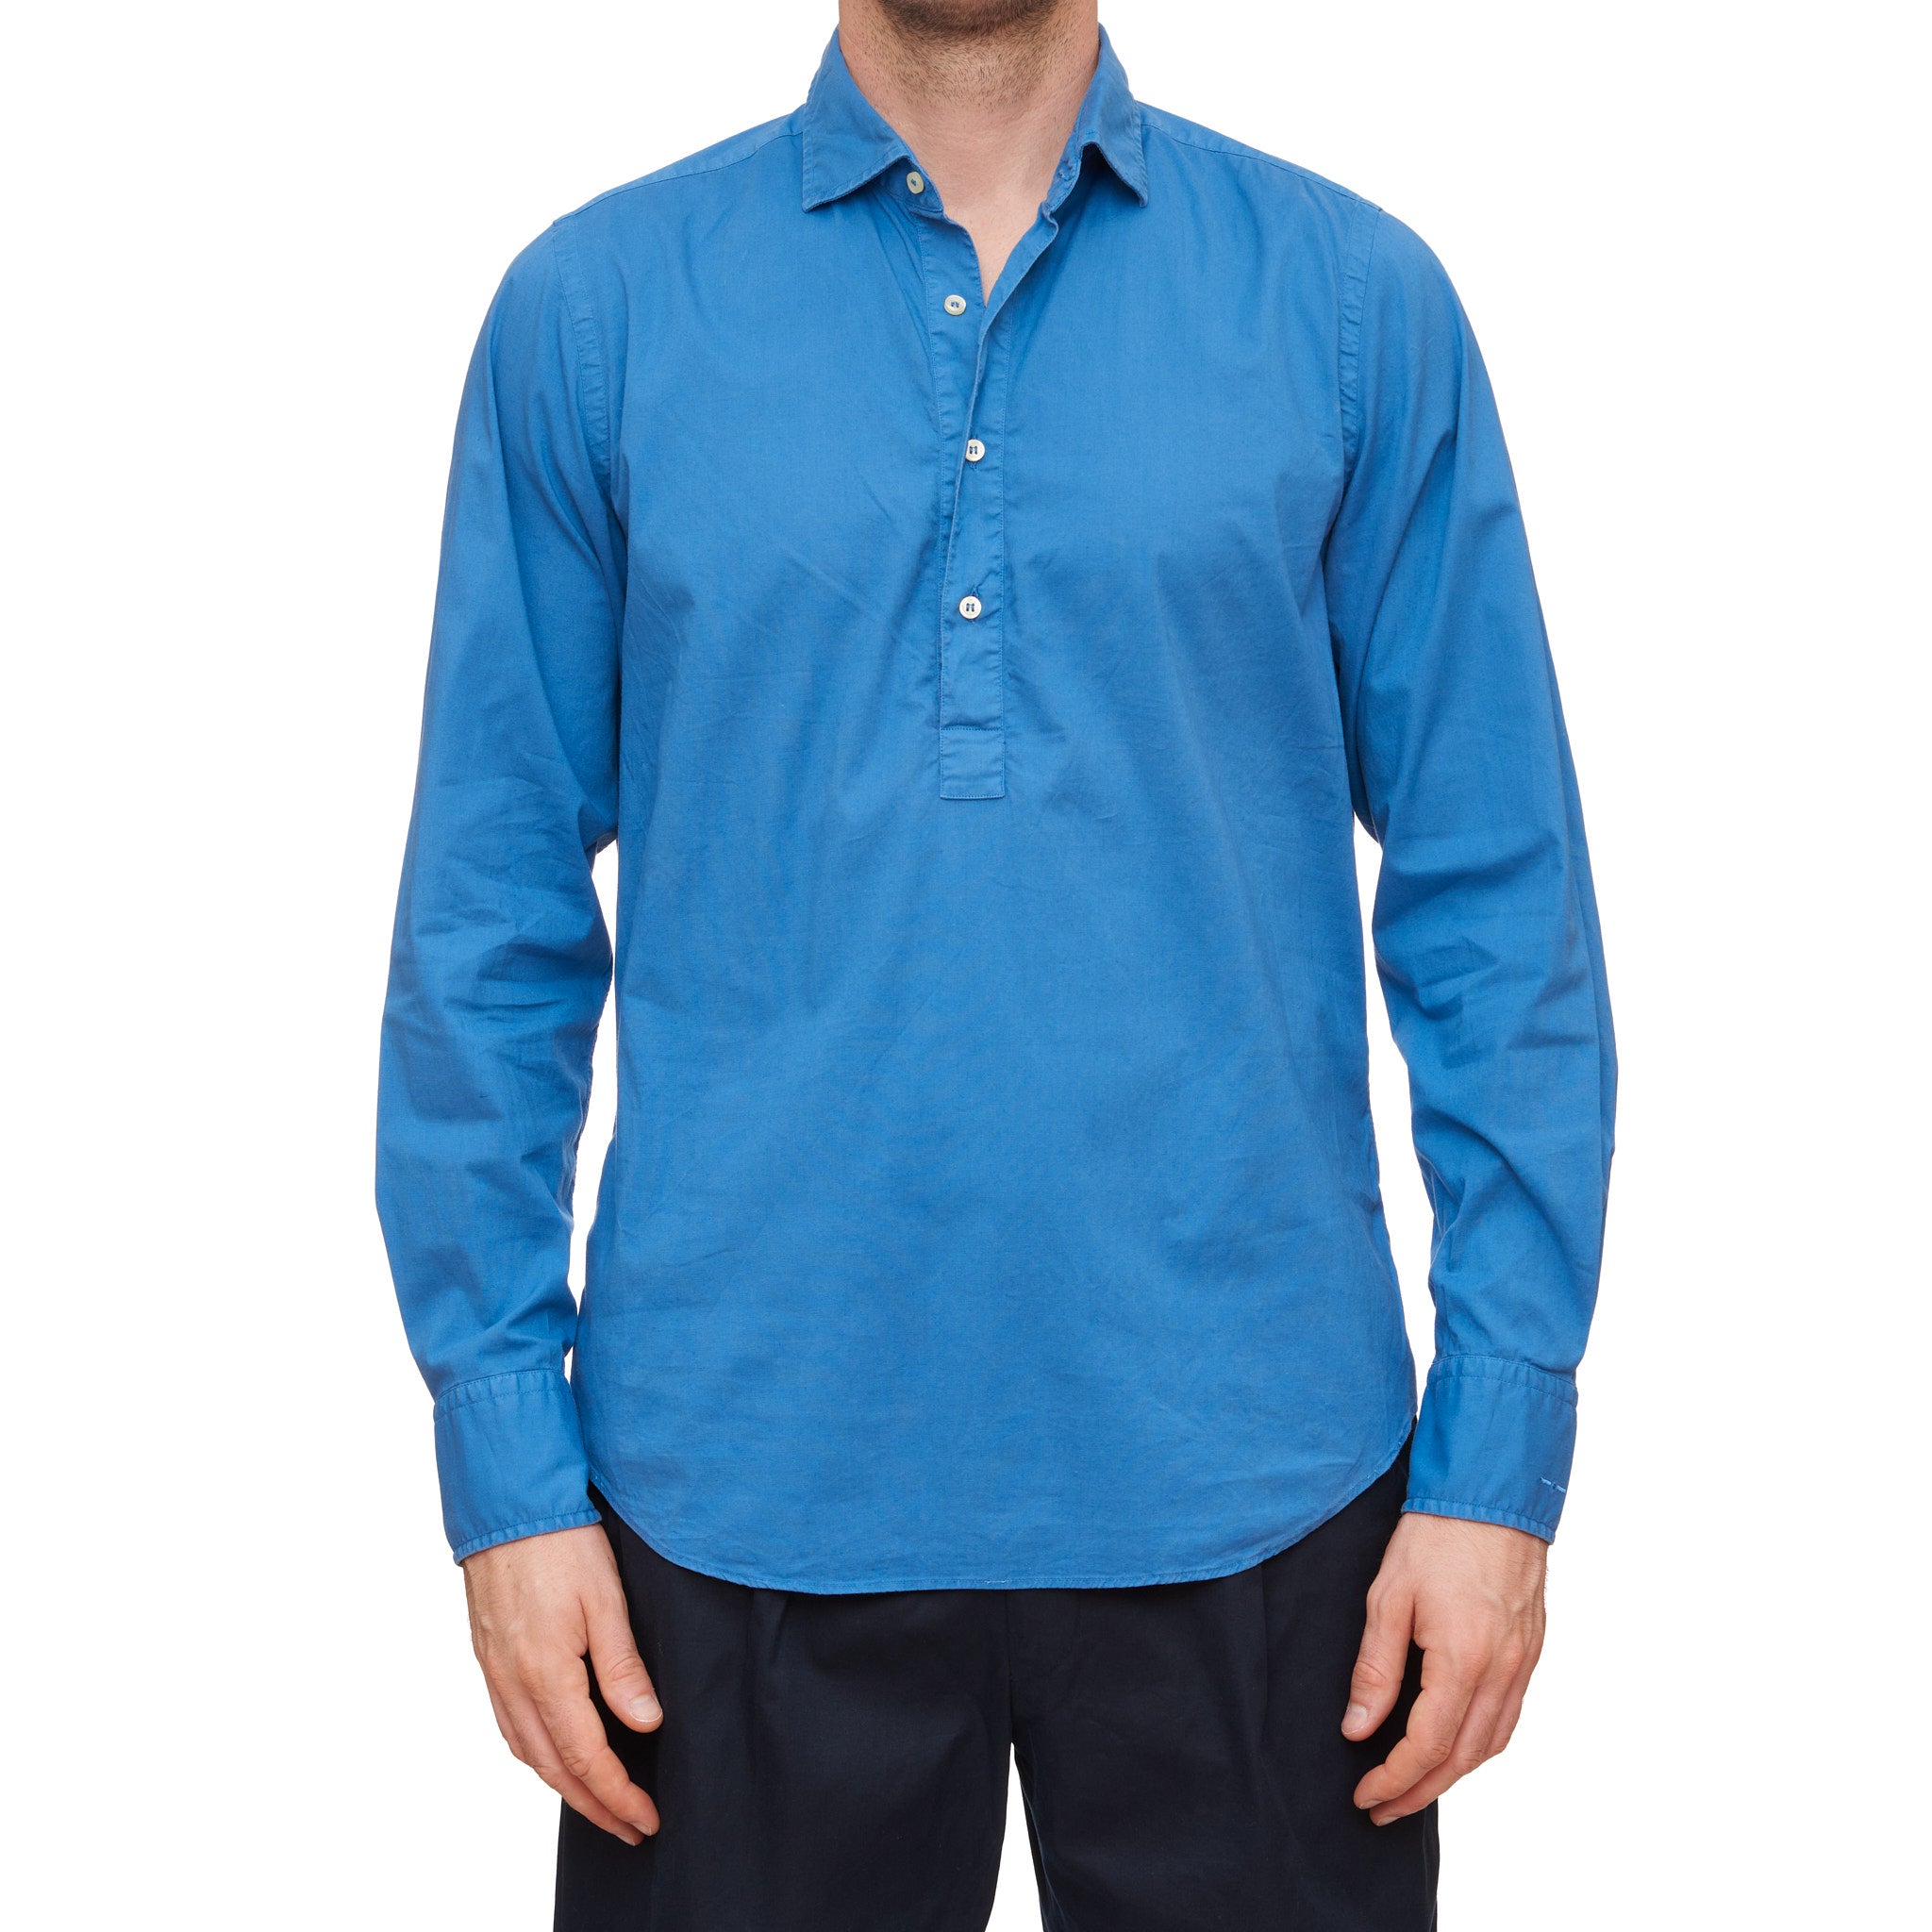 Lapo Elkann's iTALIA INDEPENDENT Blue Popover Long Sleeve Pullover Shirt  Size XL Slim Fit